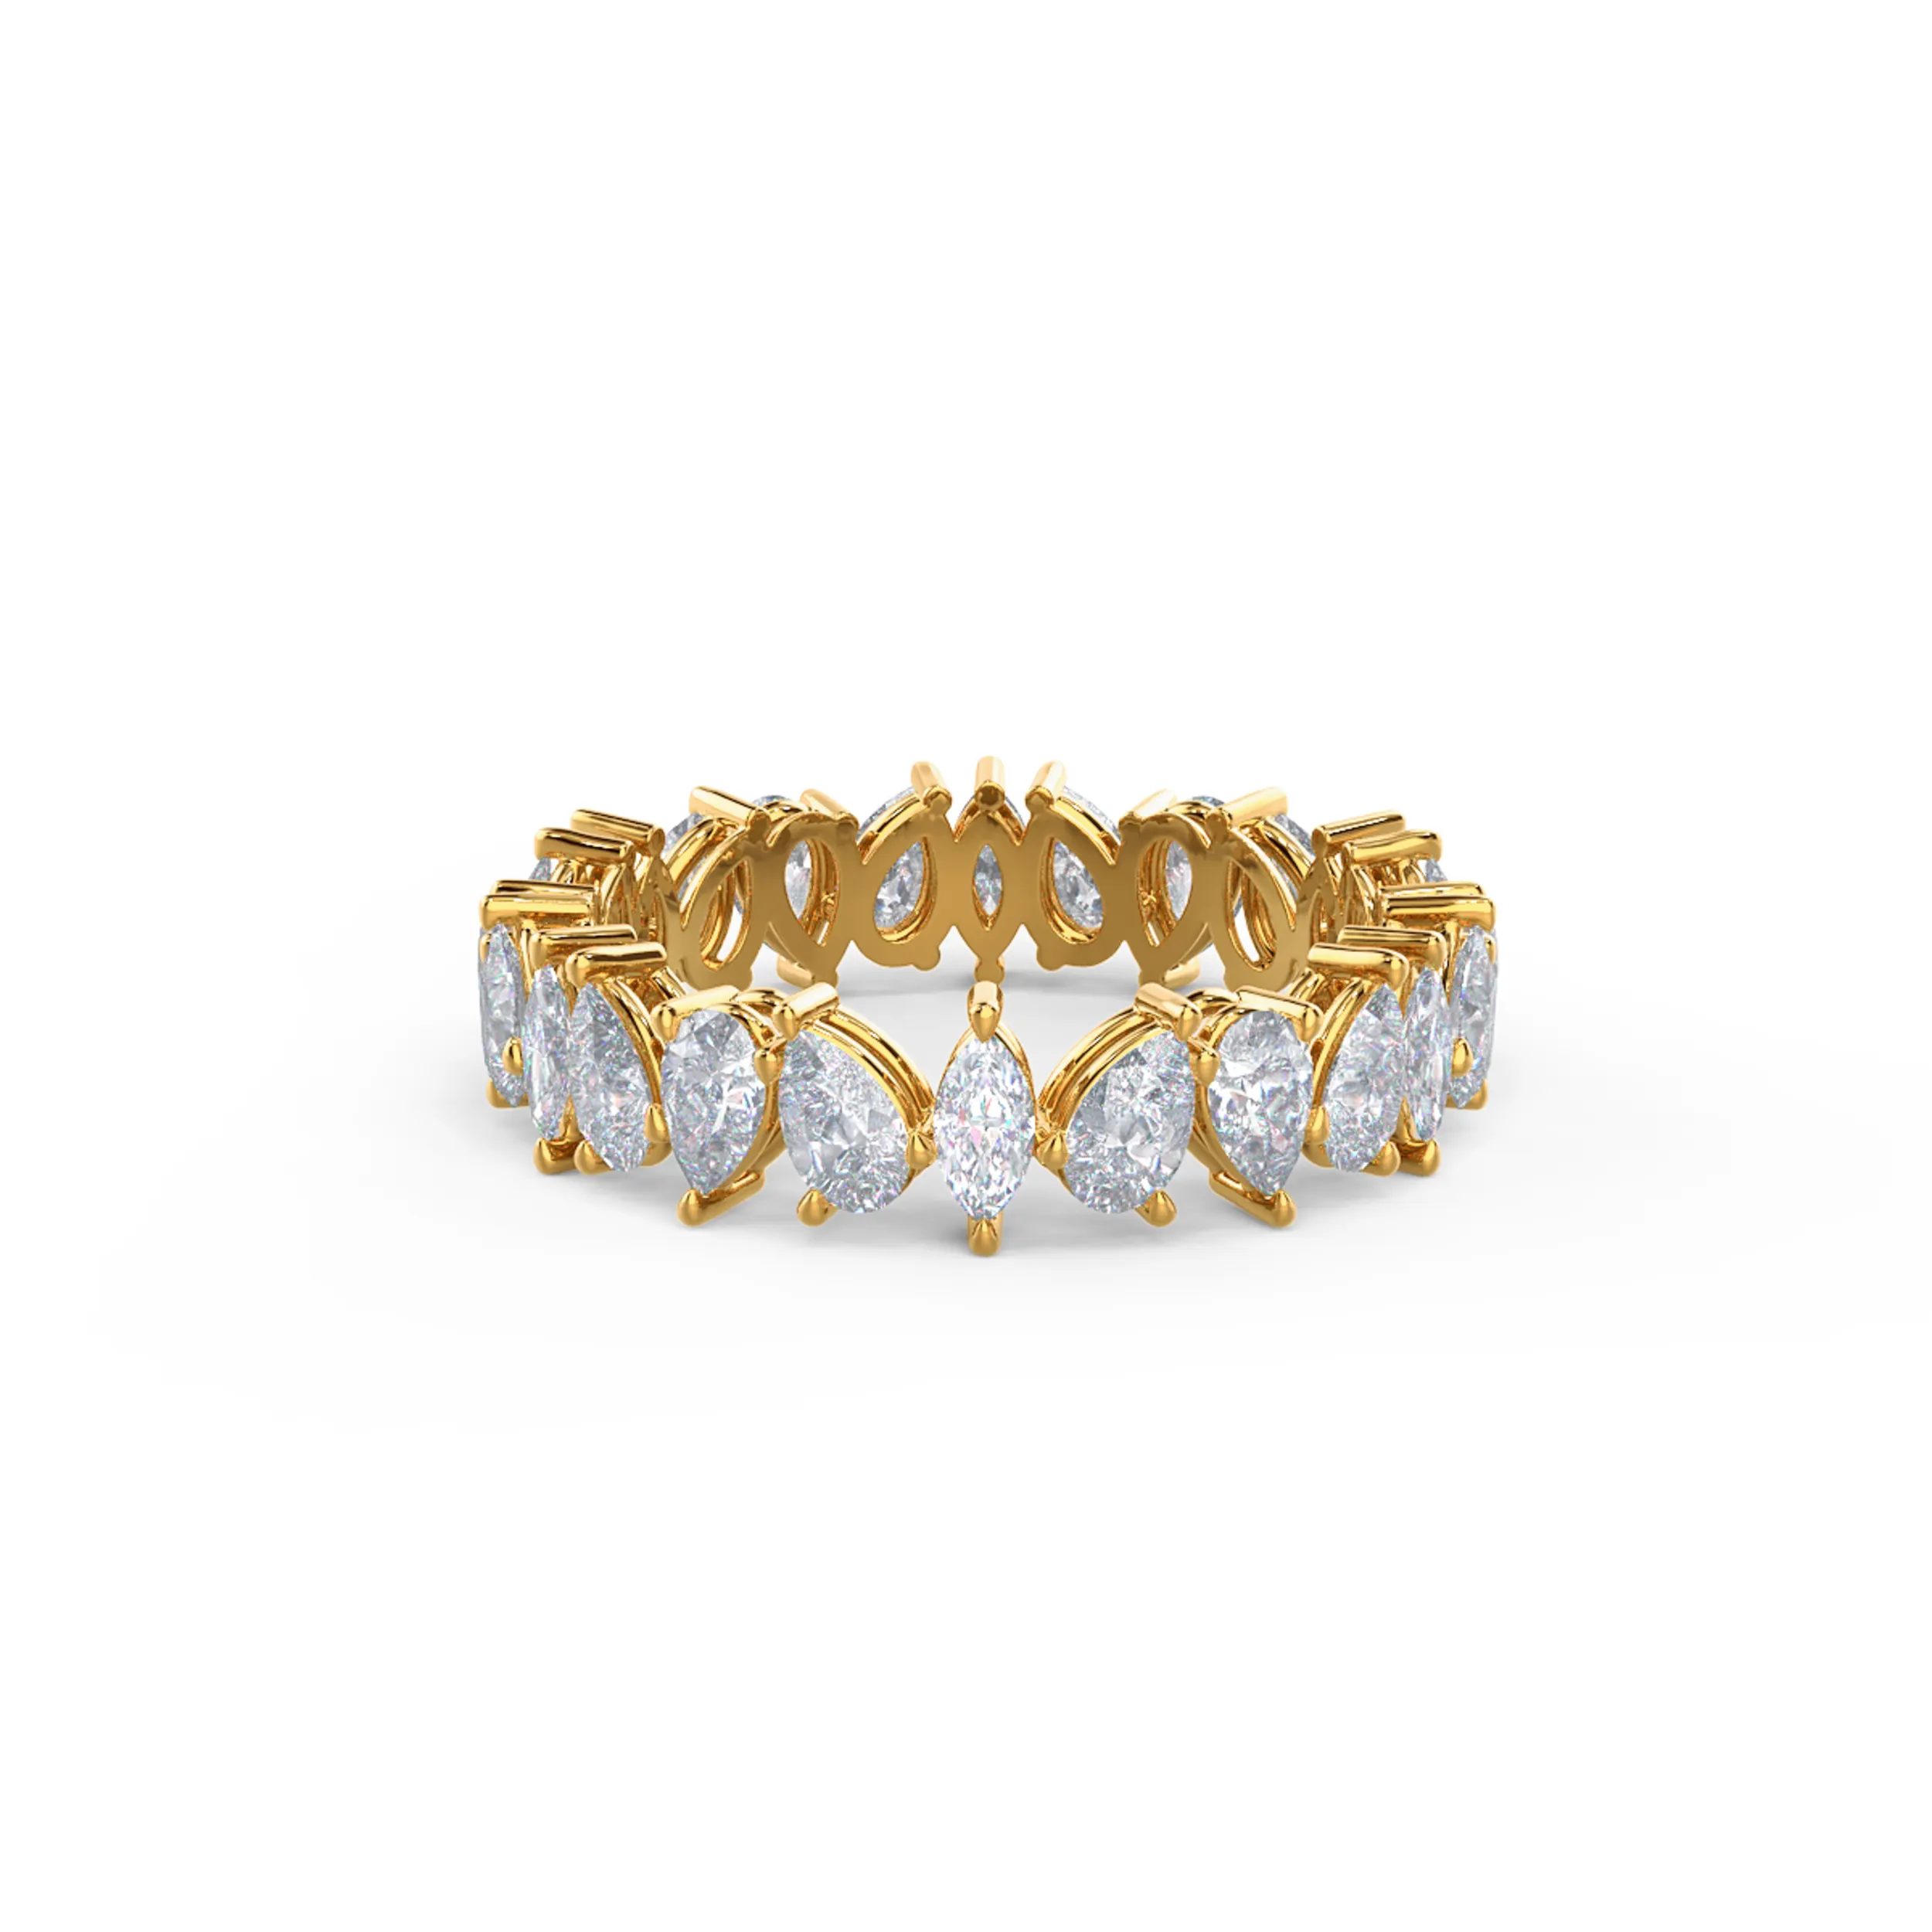 Exceptional Quality 2.0 Carat Diamonds Lauren Eternity Band in 14k Yellow Gold (Main View)